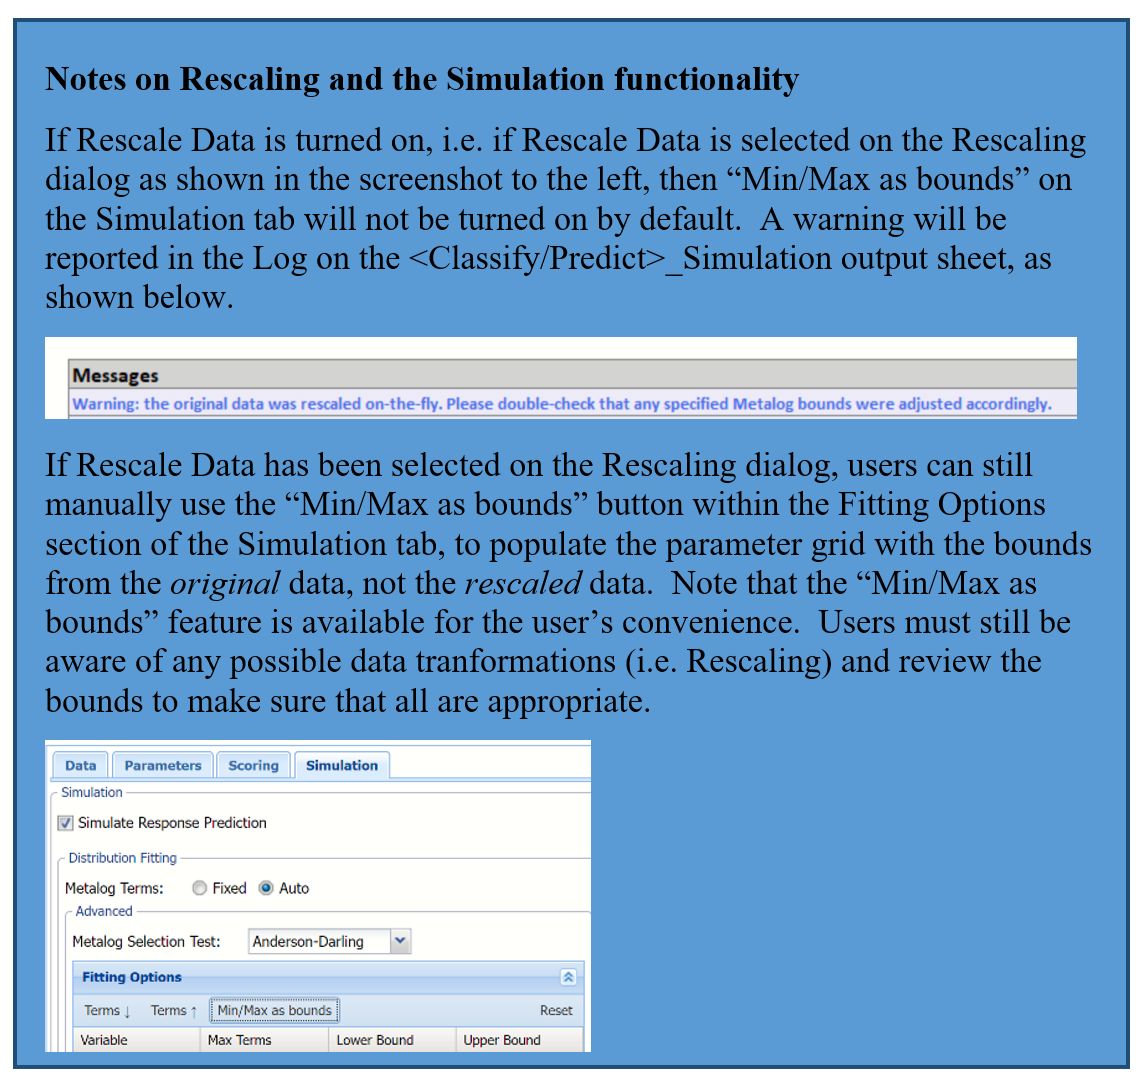 Analytic Solver Data Mining: Notes on Rescaling and Simulation functionality